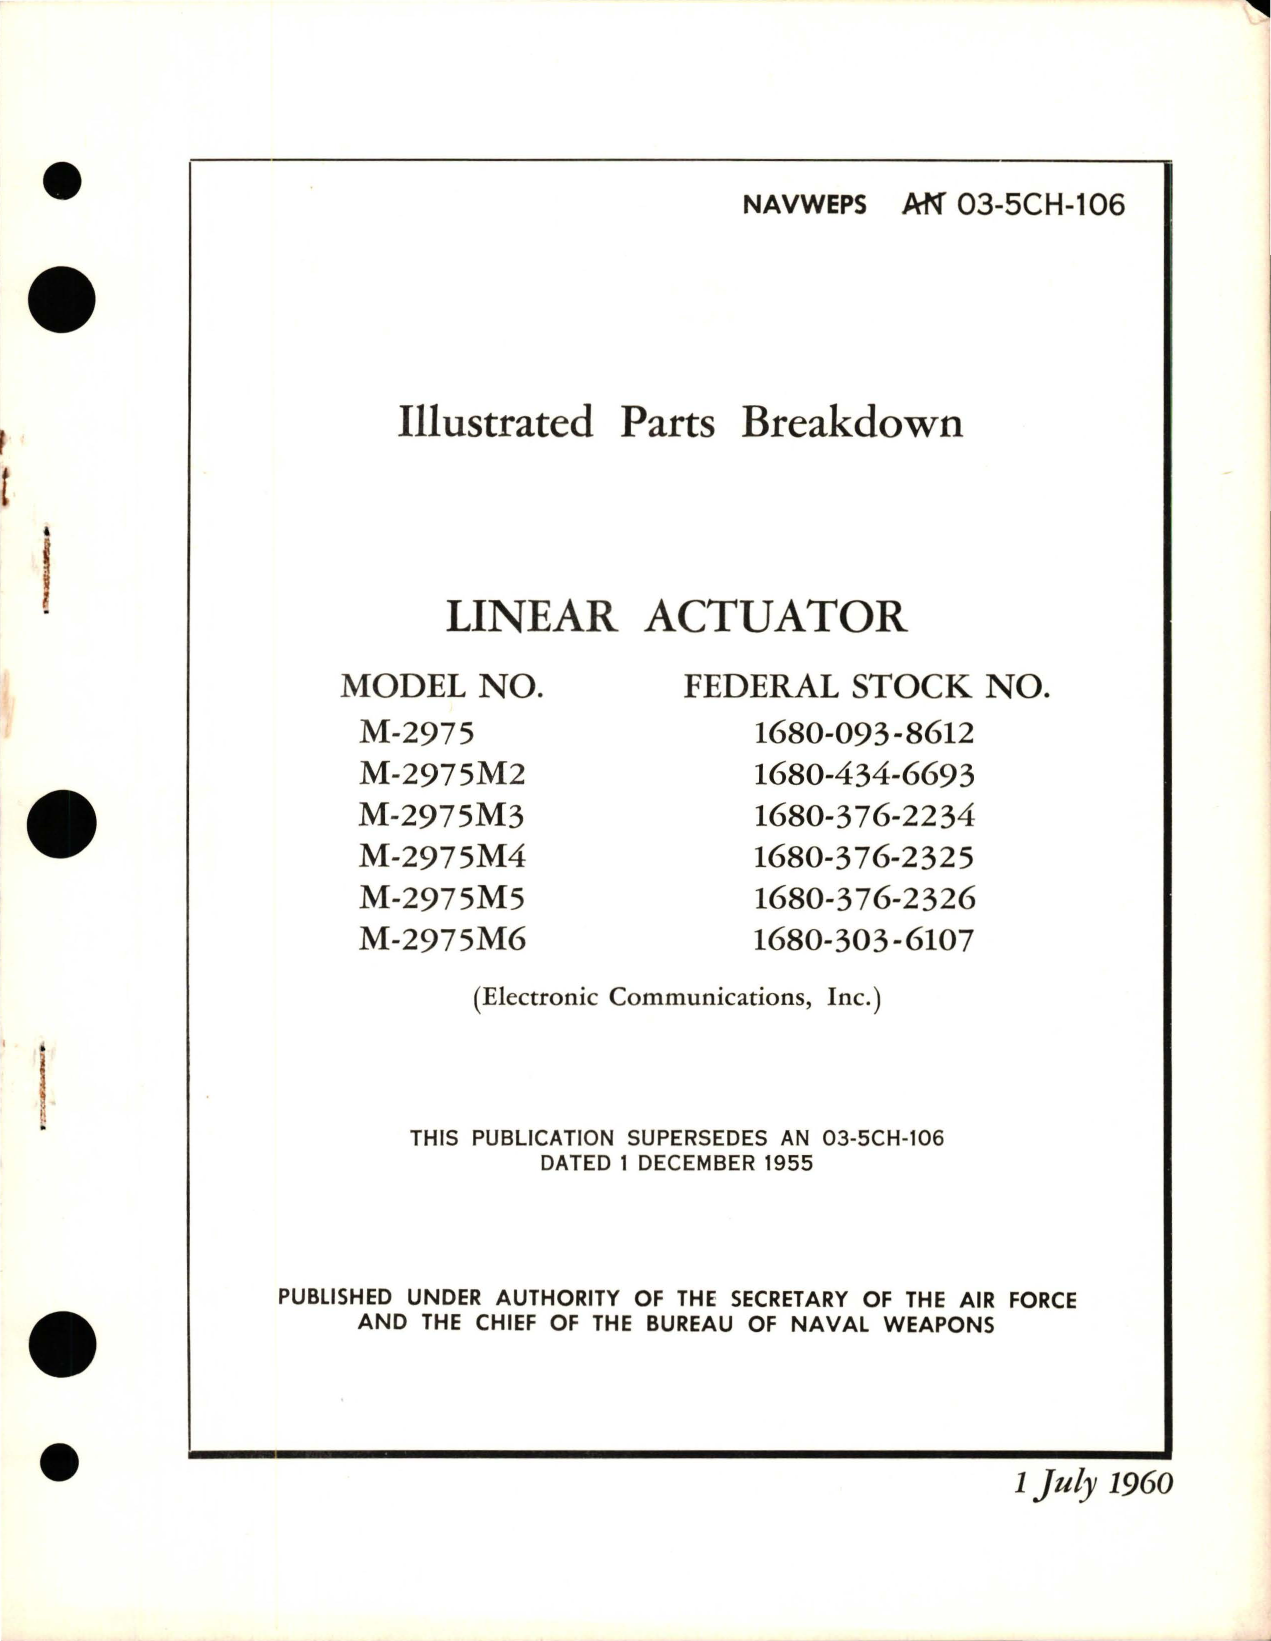 Sample page 1 from AirCorps Library document: Illustrated Parts Breakdown for Linear Actuator - Models M-2975, M-2975M2, M-2975M3, M-2975M4, M-2975M5, and M-2975M6